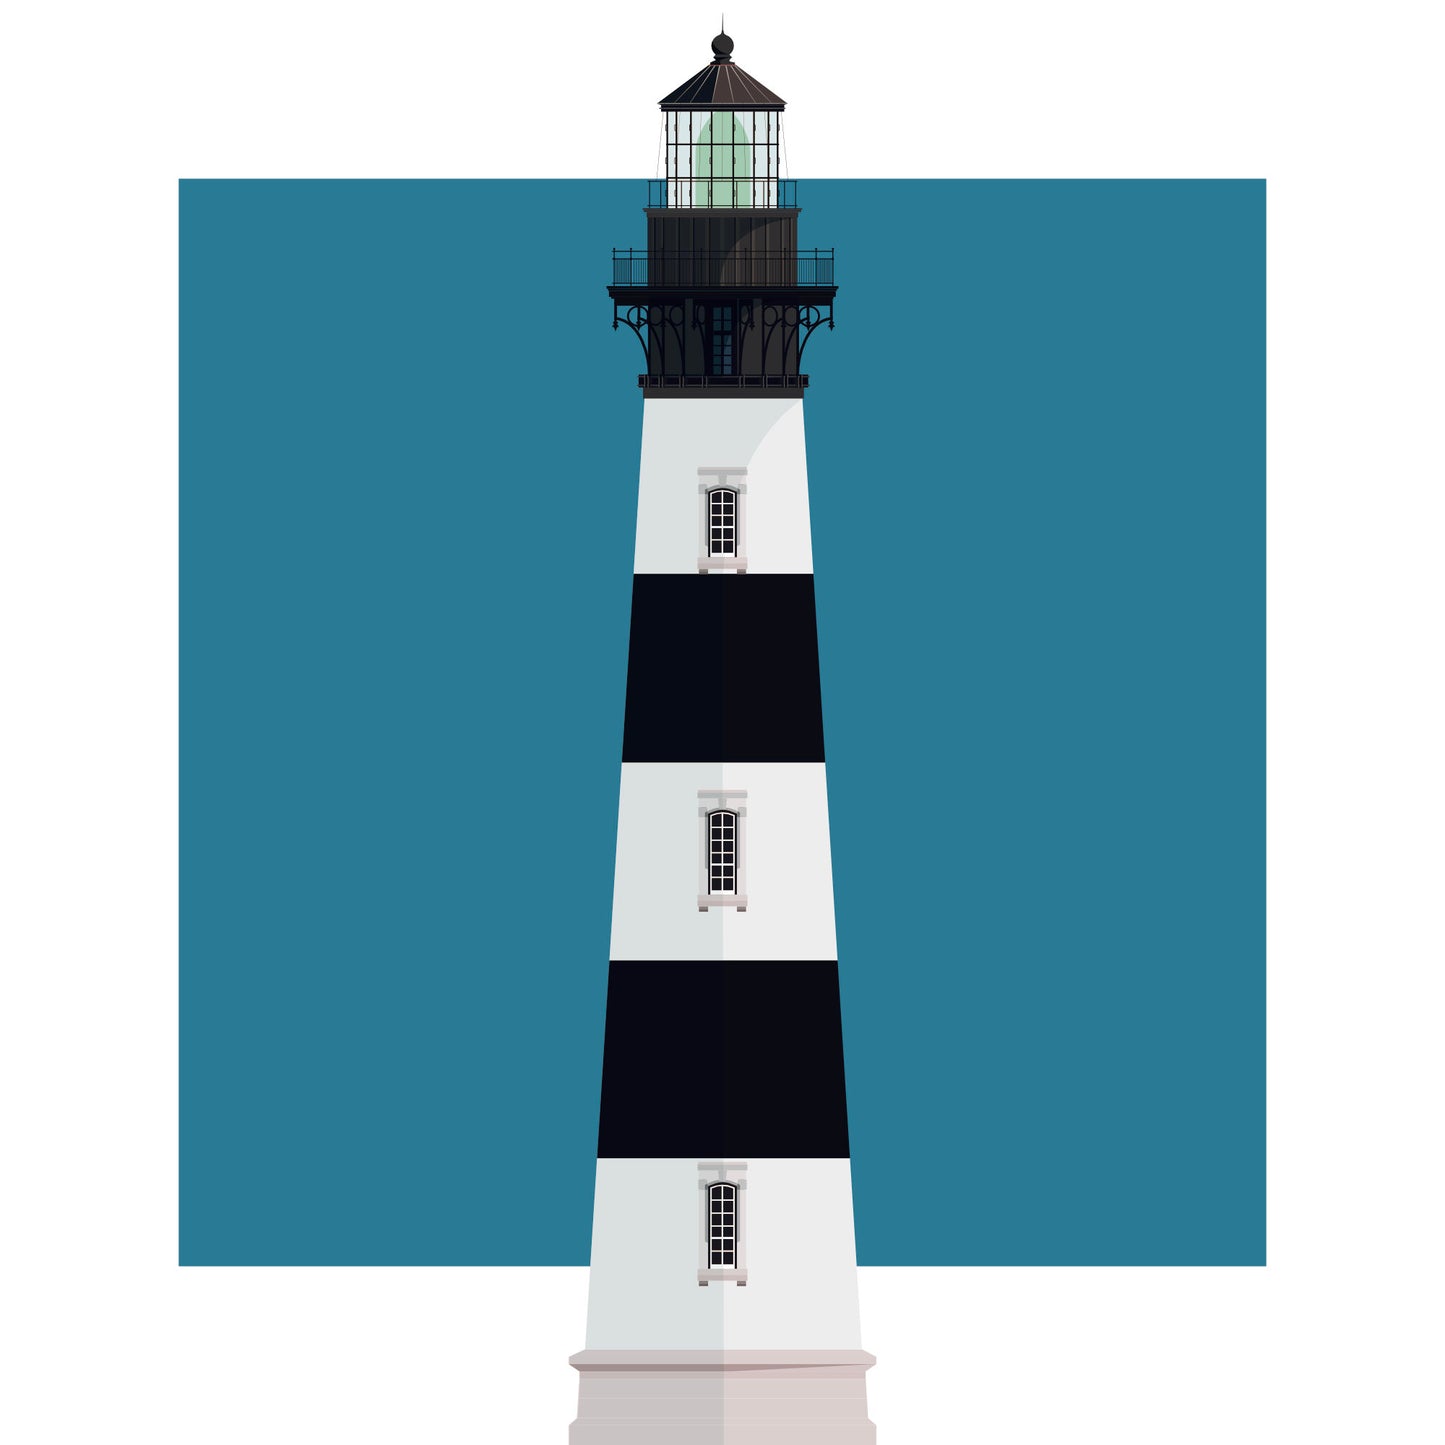 Illustration of the Bodie Island lighthouse, North Carolina, USA. On a white background with aqua blue square as a backdrop.